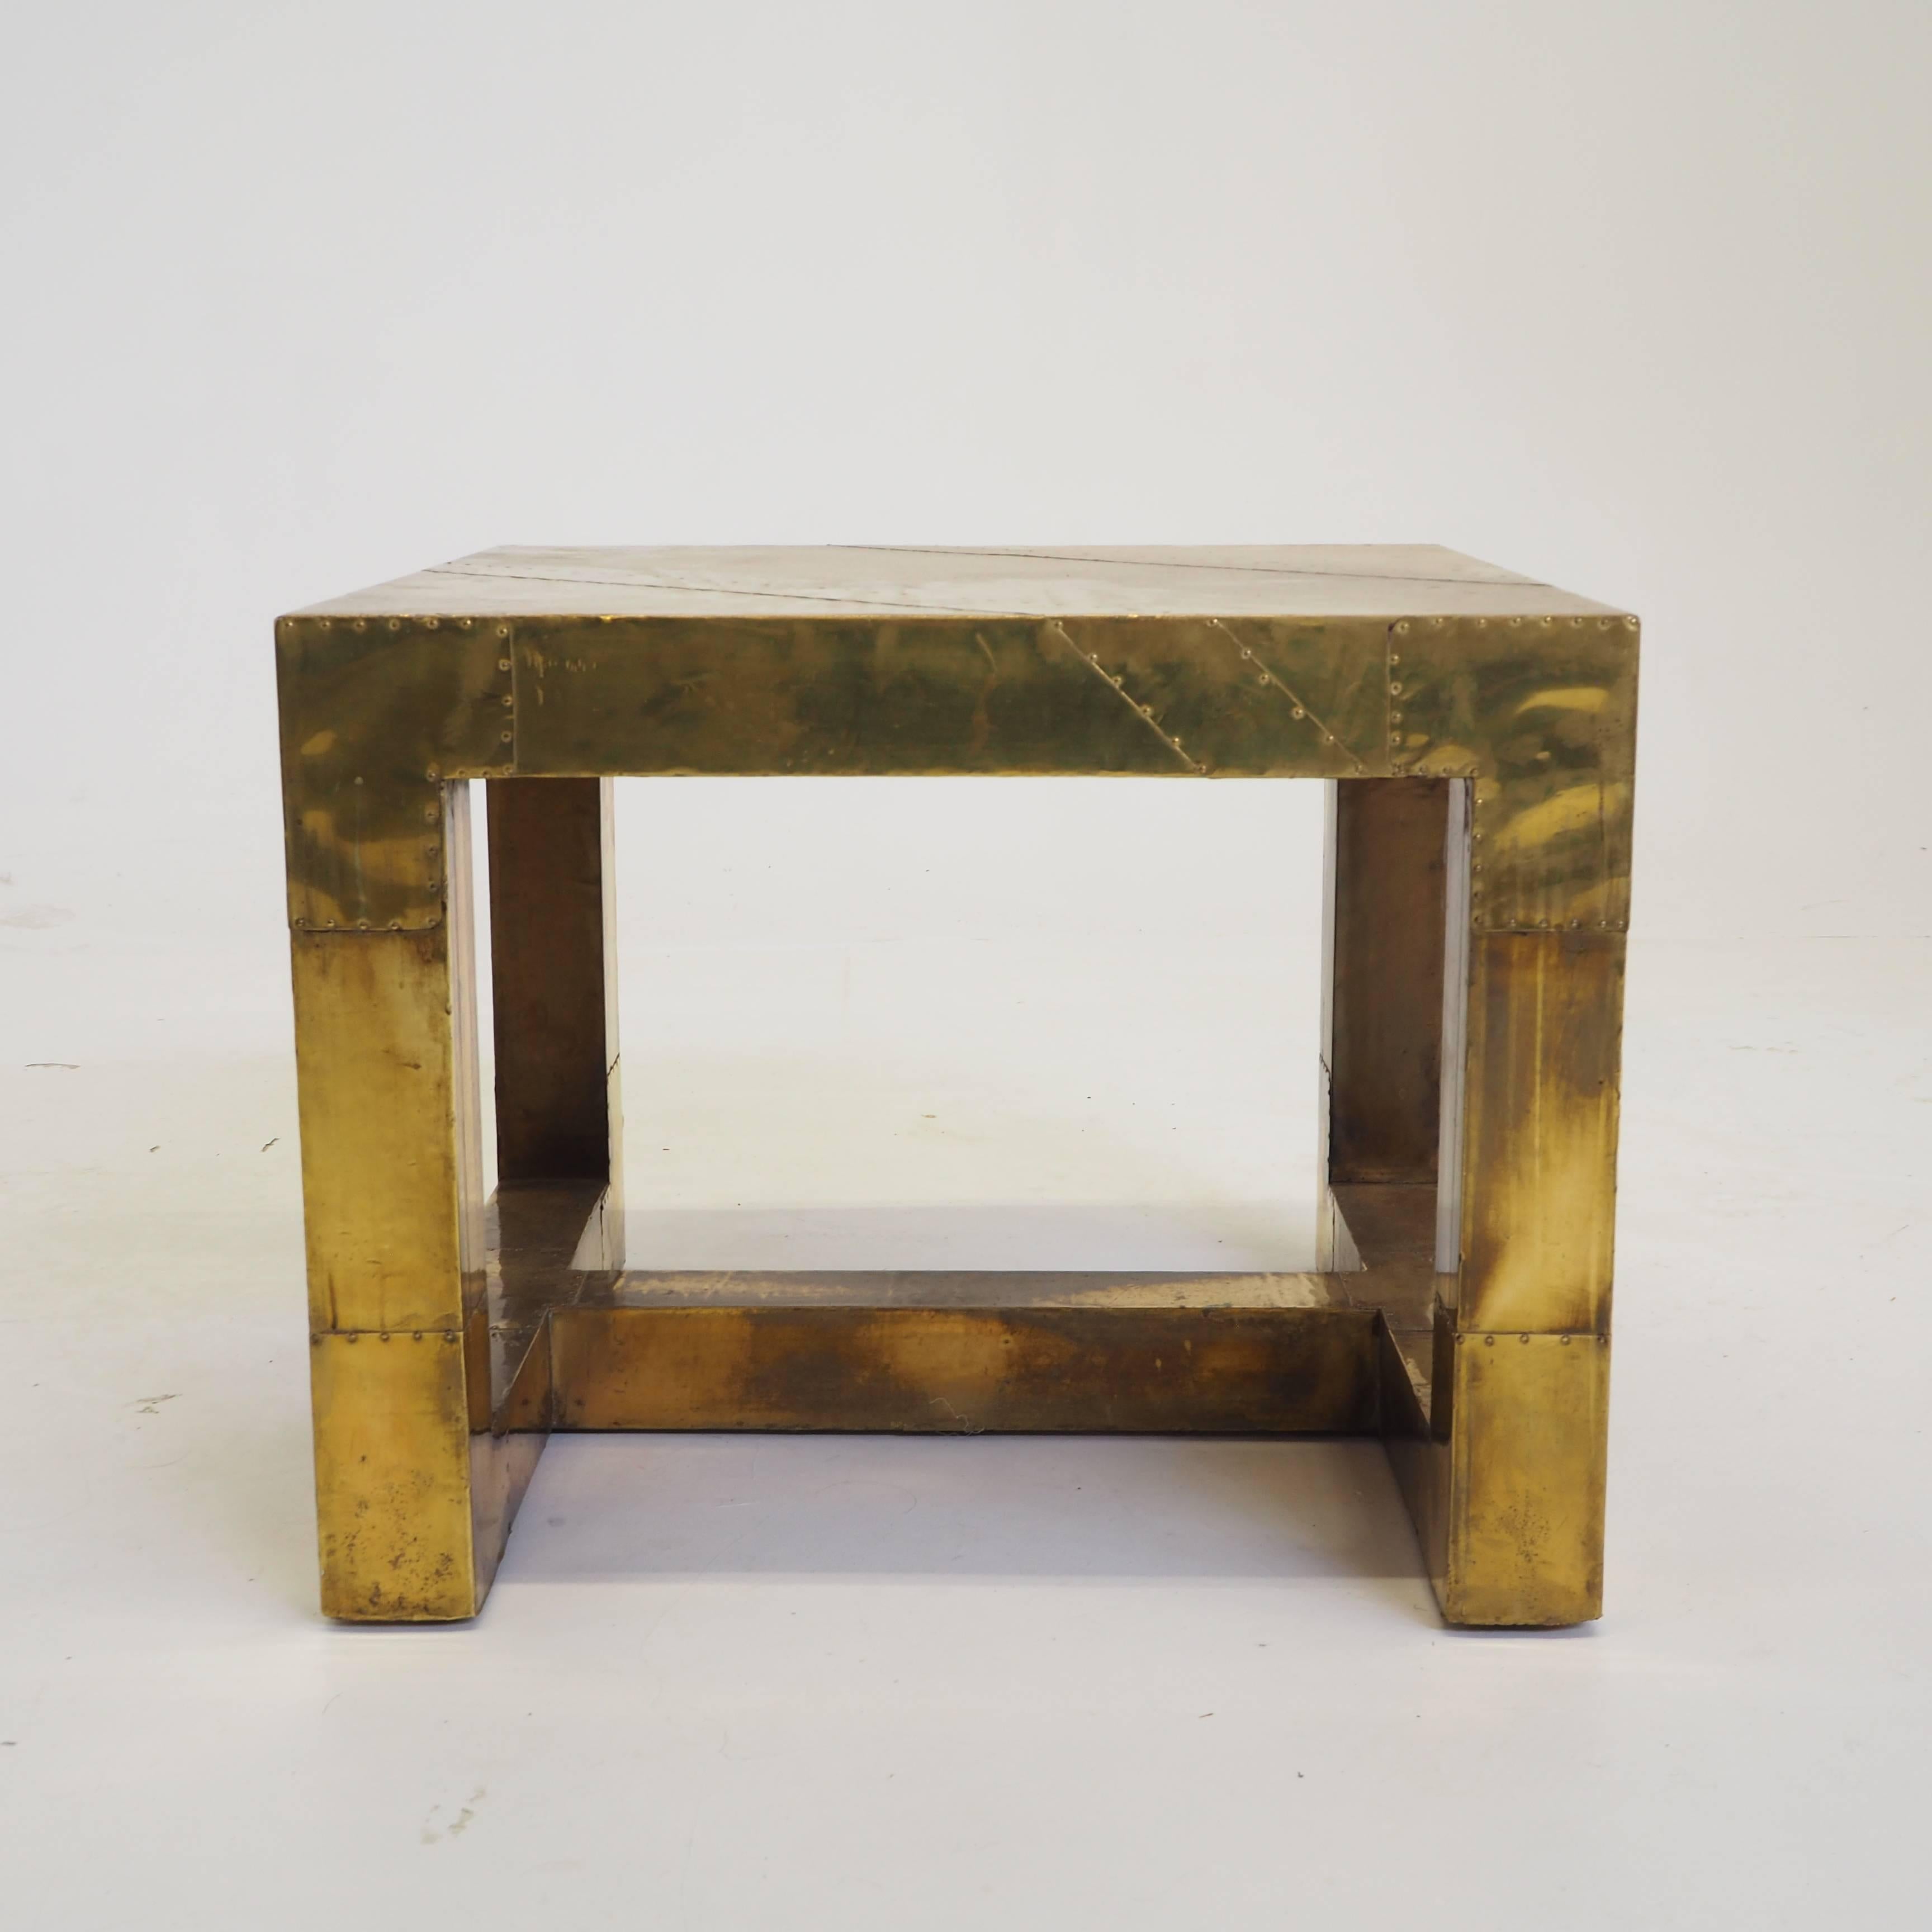 Beautiful designed coffee-cocktail table with a just stunning patina.
The dimensions of this cocktail table are perfect, and would perfectly fits in a luxury eclectic interior.
Made from a wooden base covered with brass sheets putted together with